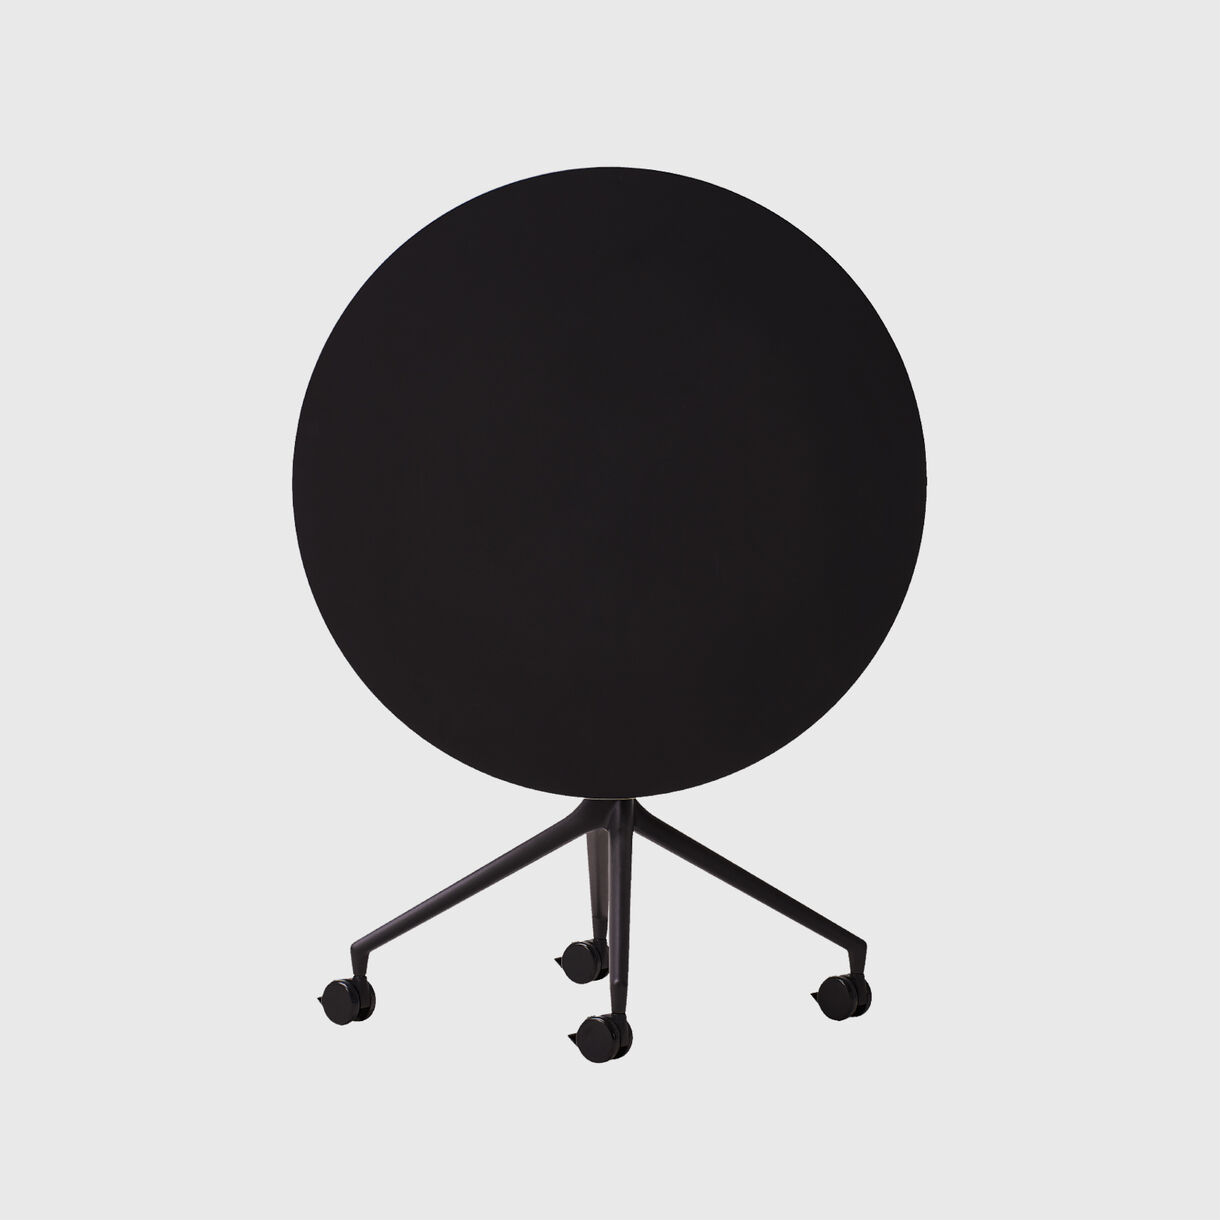 AS400 Table, Round, Black